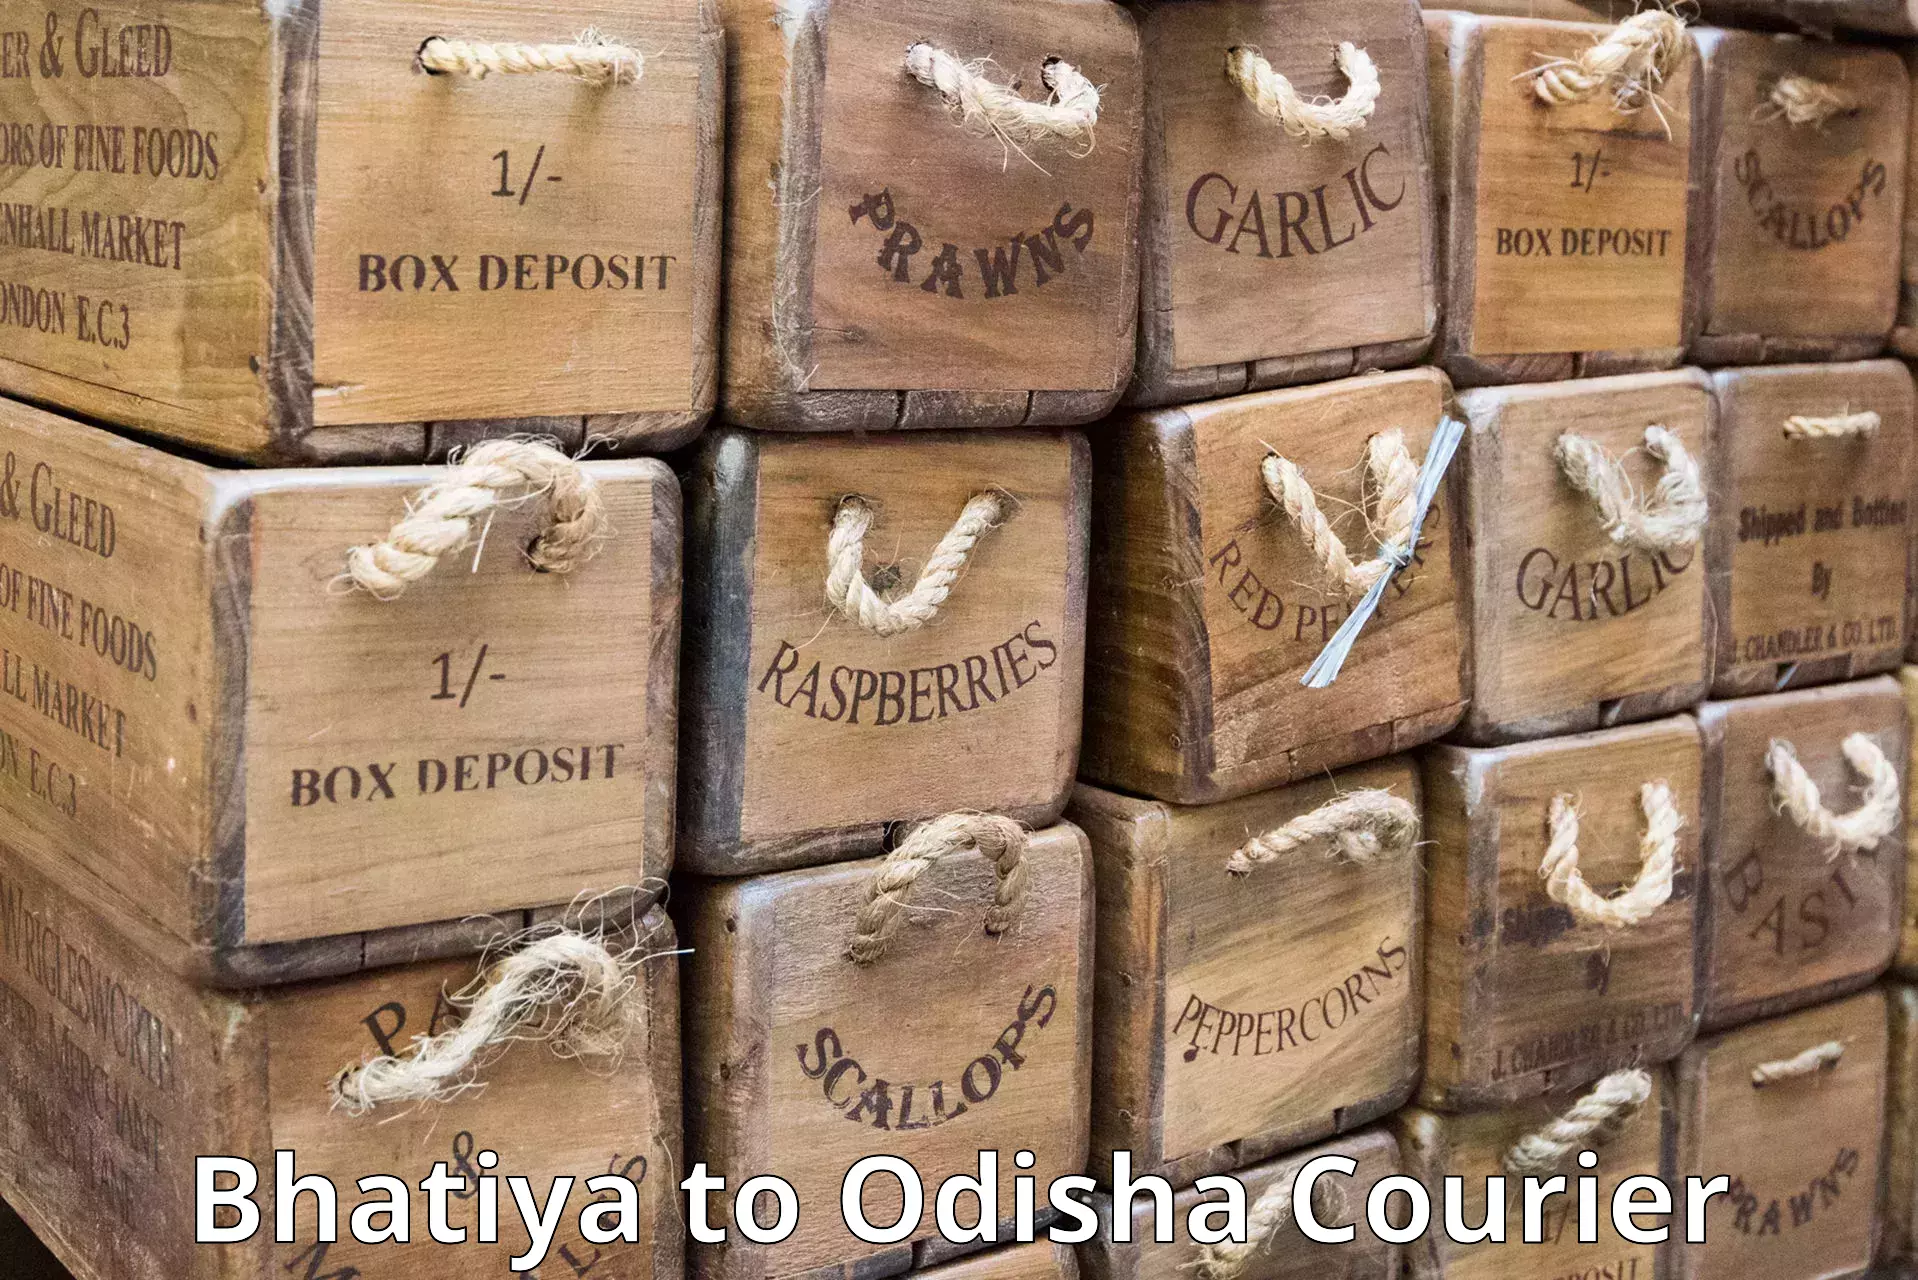 Express delivery solutions Bhatiya to Cuttack